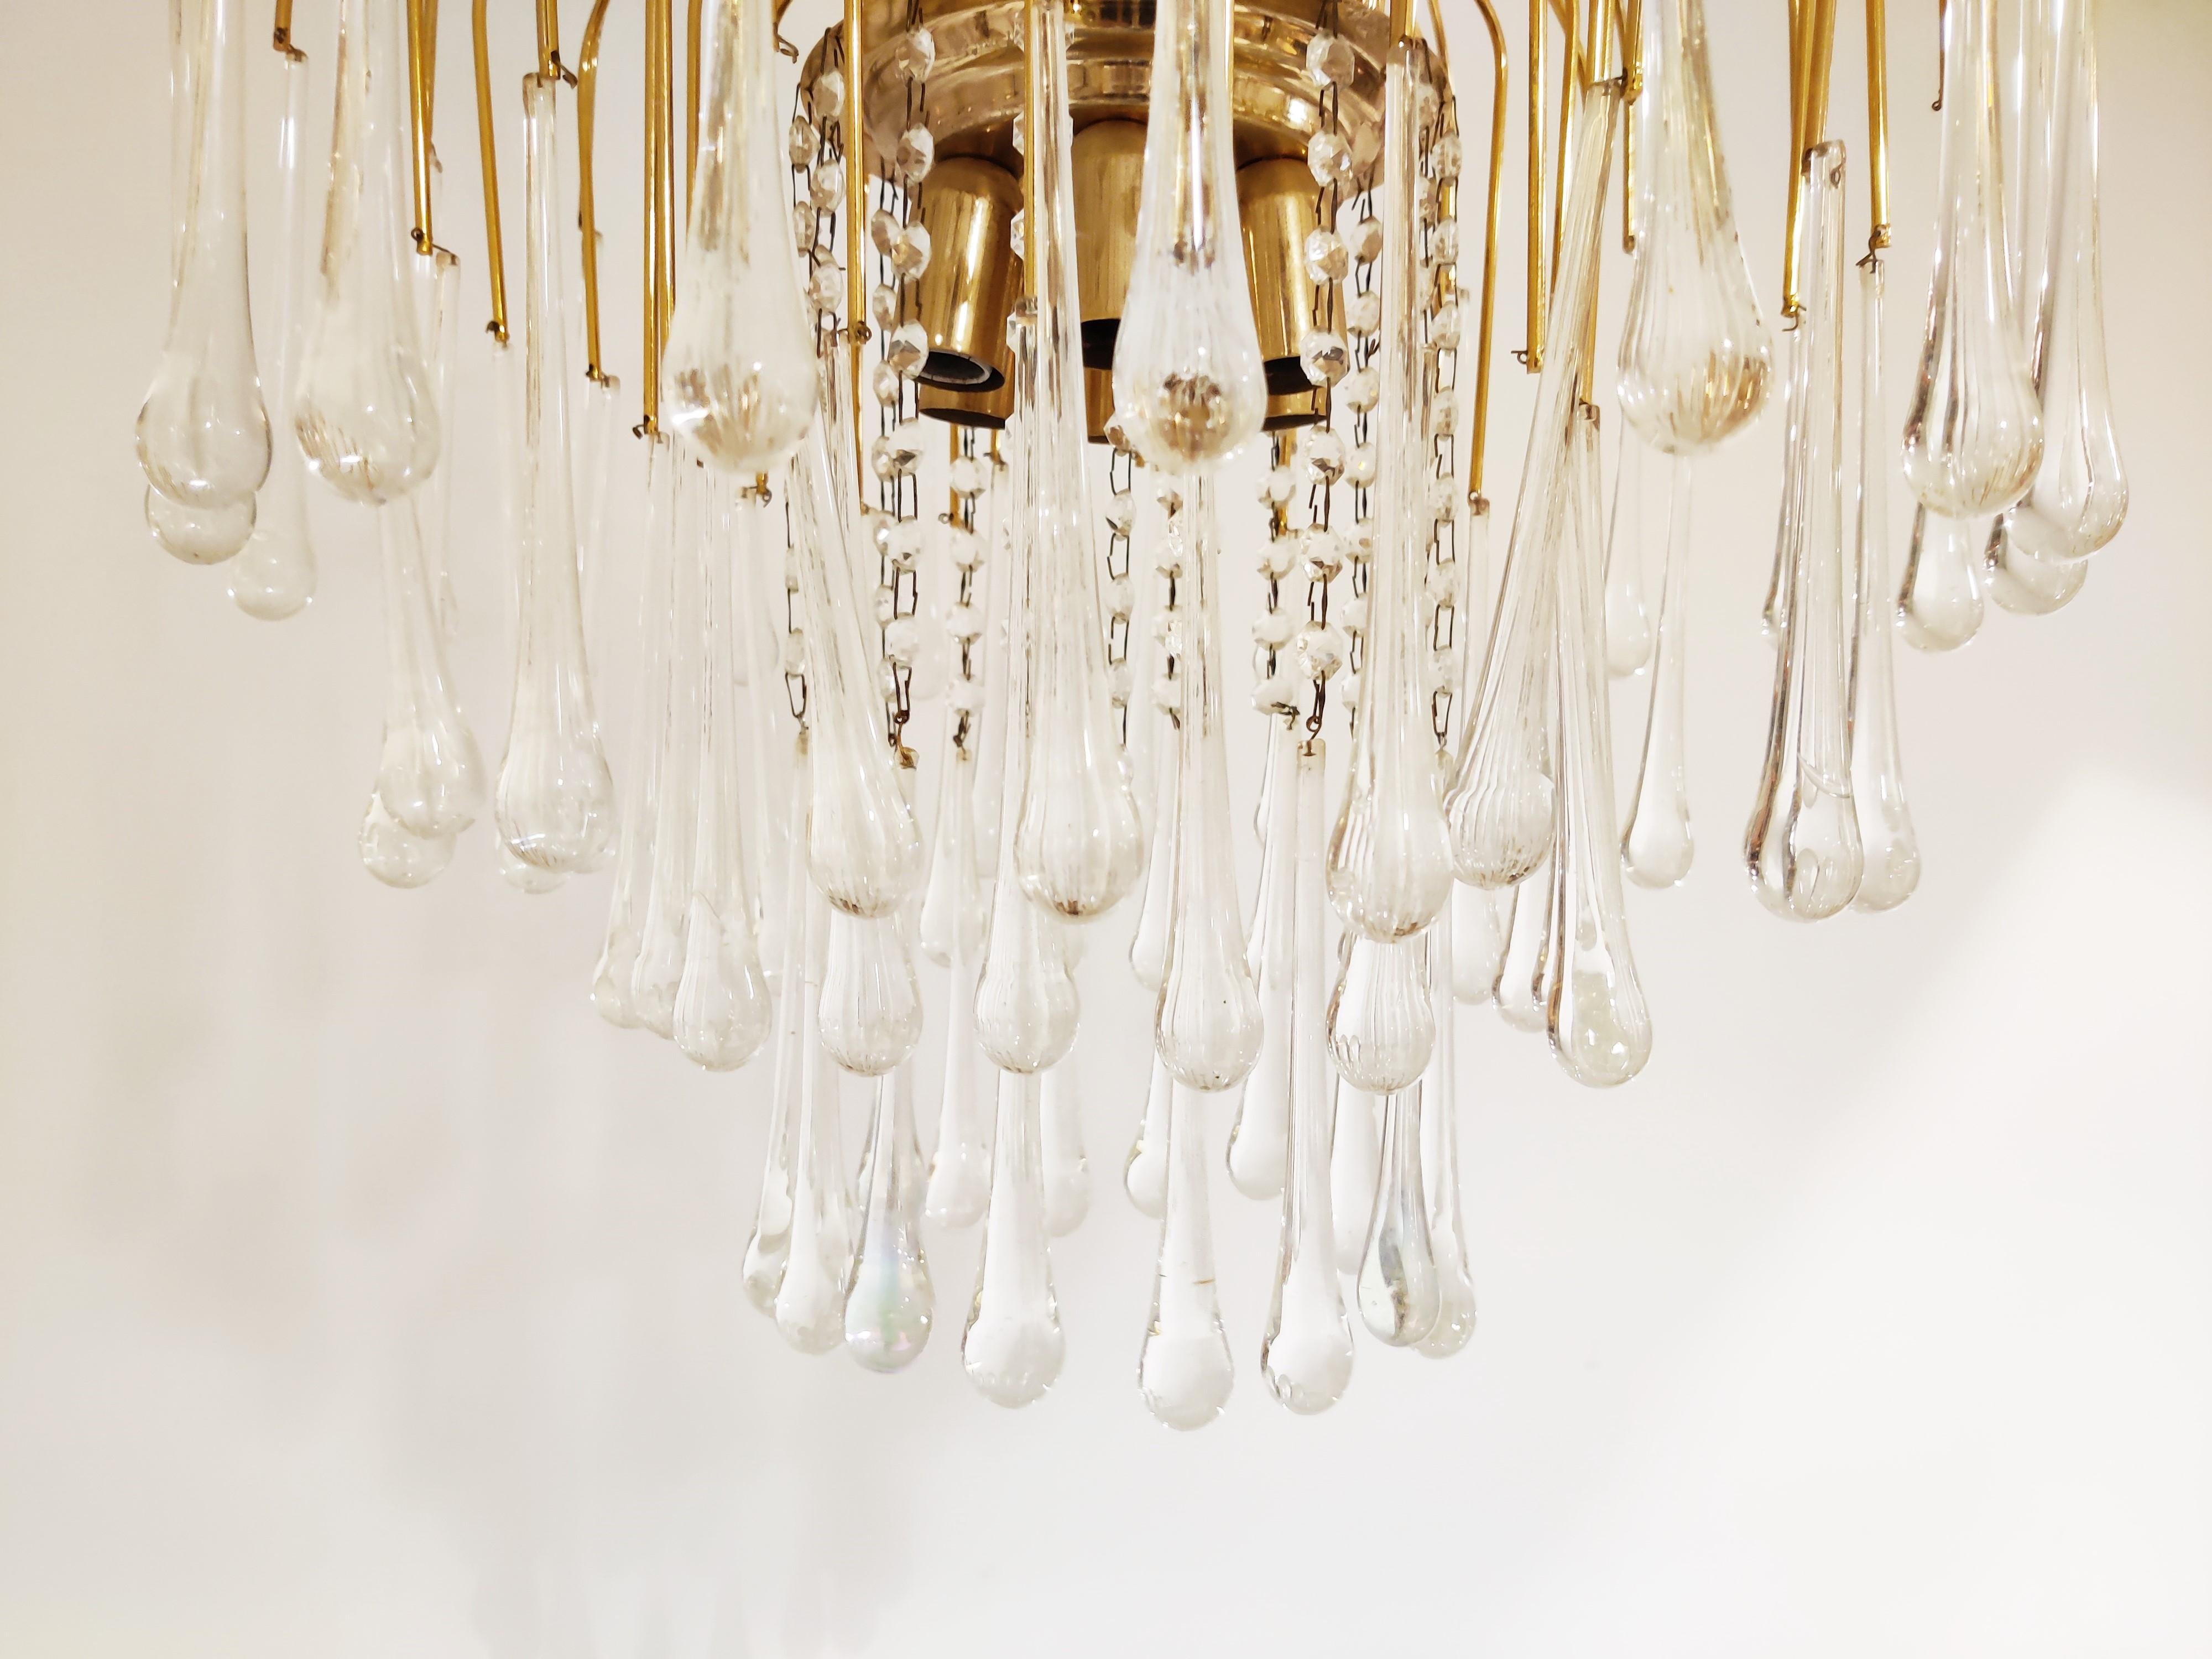 Elegant brass and murano crystal chandelier.

The lamp is decorated with handblown crystal murano teardrop glasses.

The chandelier emits a stunning light.

The lamp is fitted with 6 E14 light sockets.

It comes with its original chain and